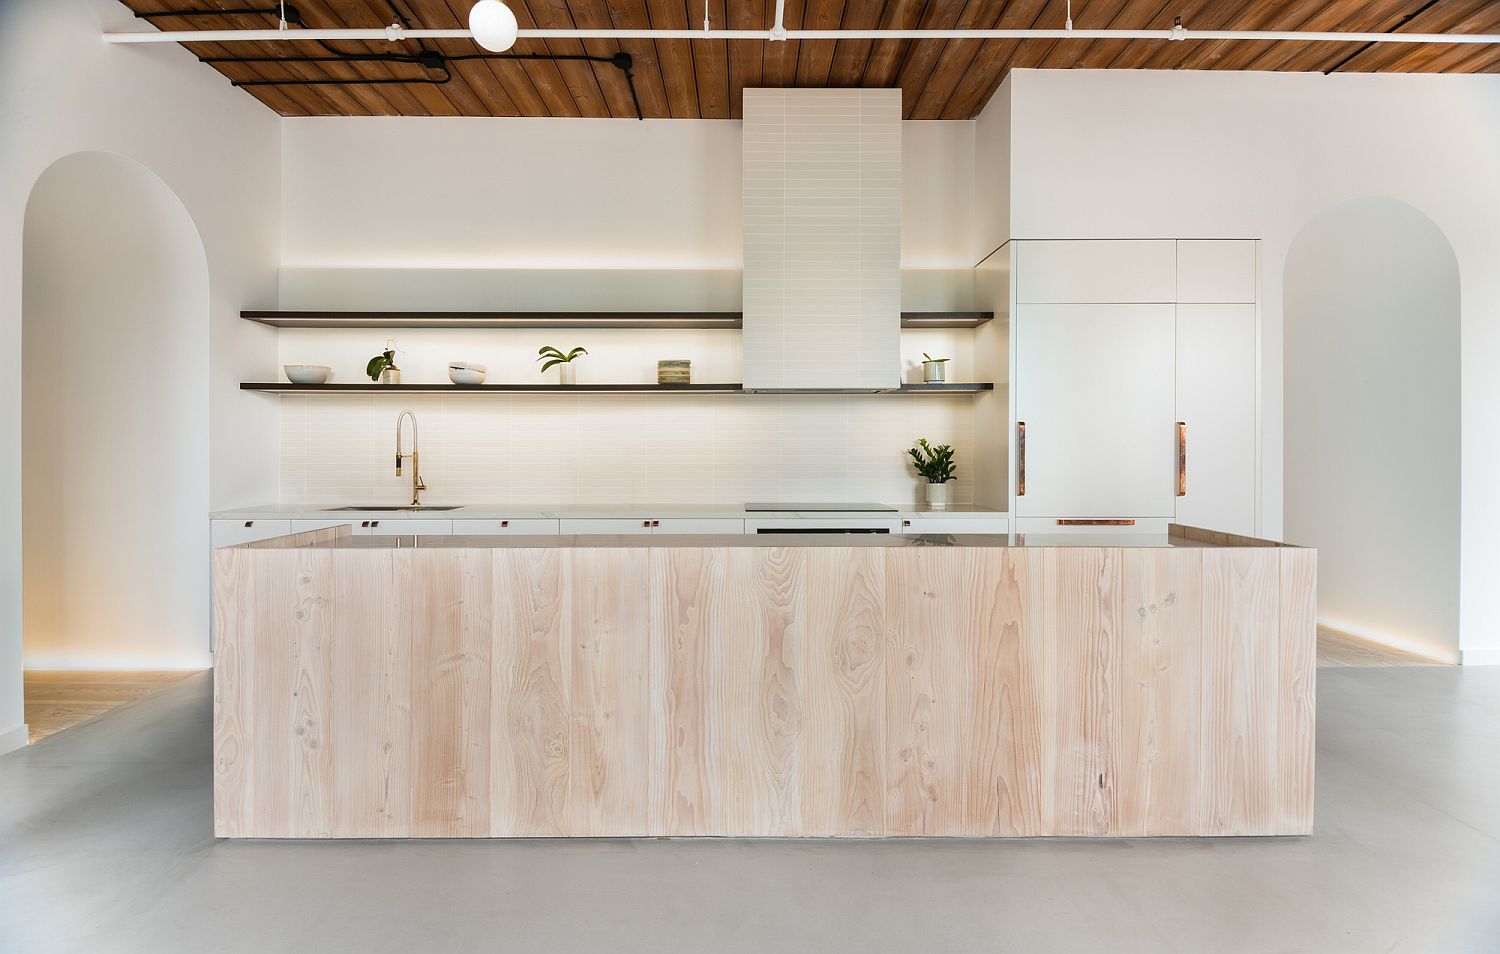 Central-island-of-the-spacious-white-kitchen-clad-in-douglas-fir